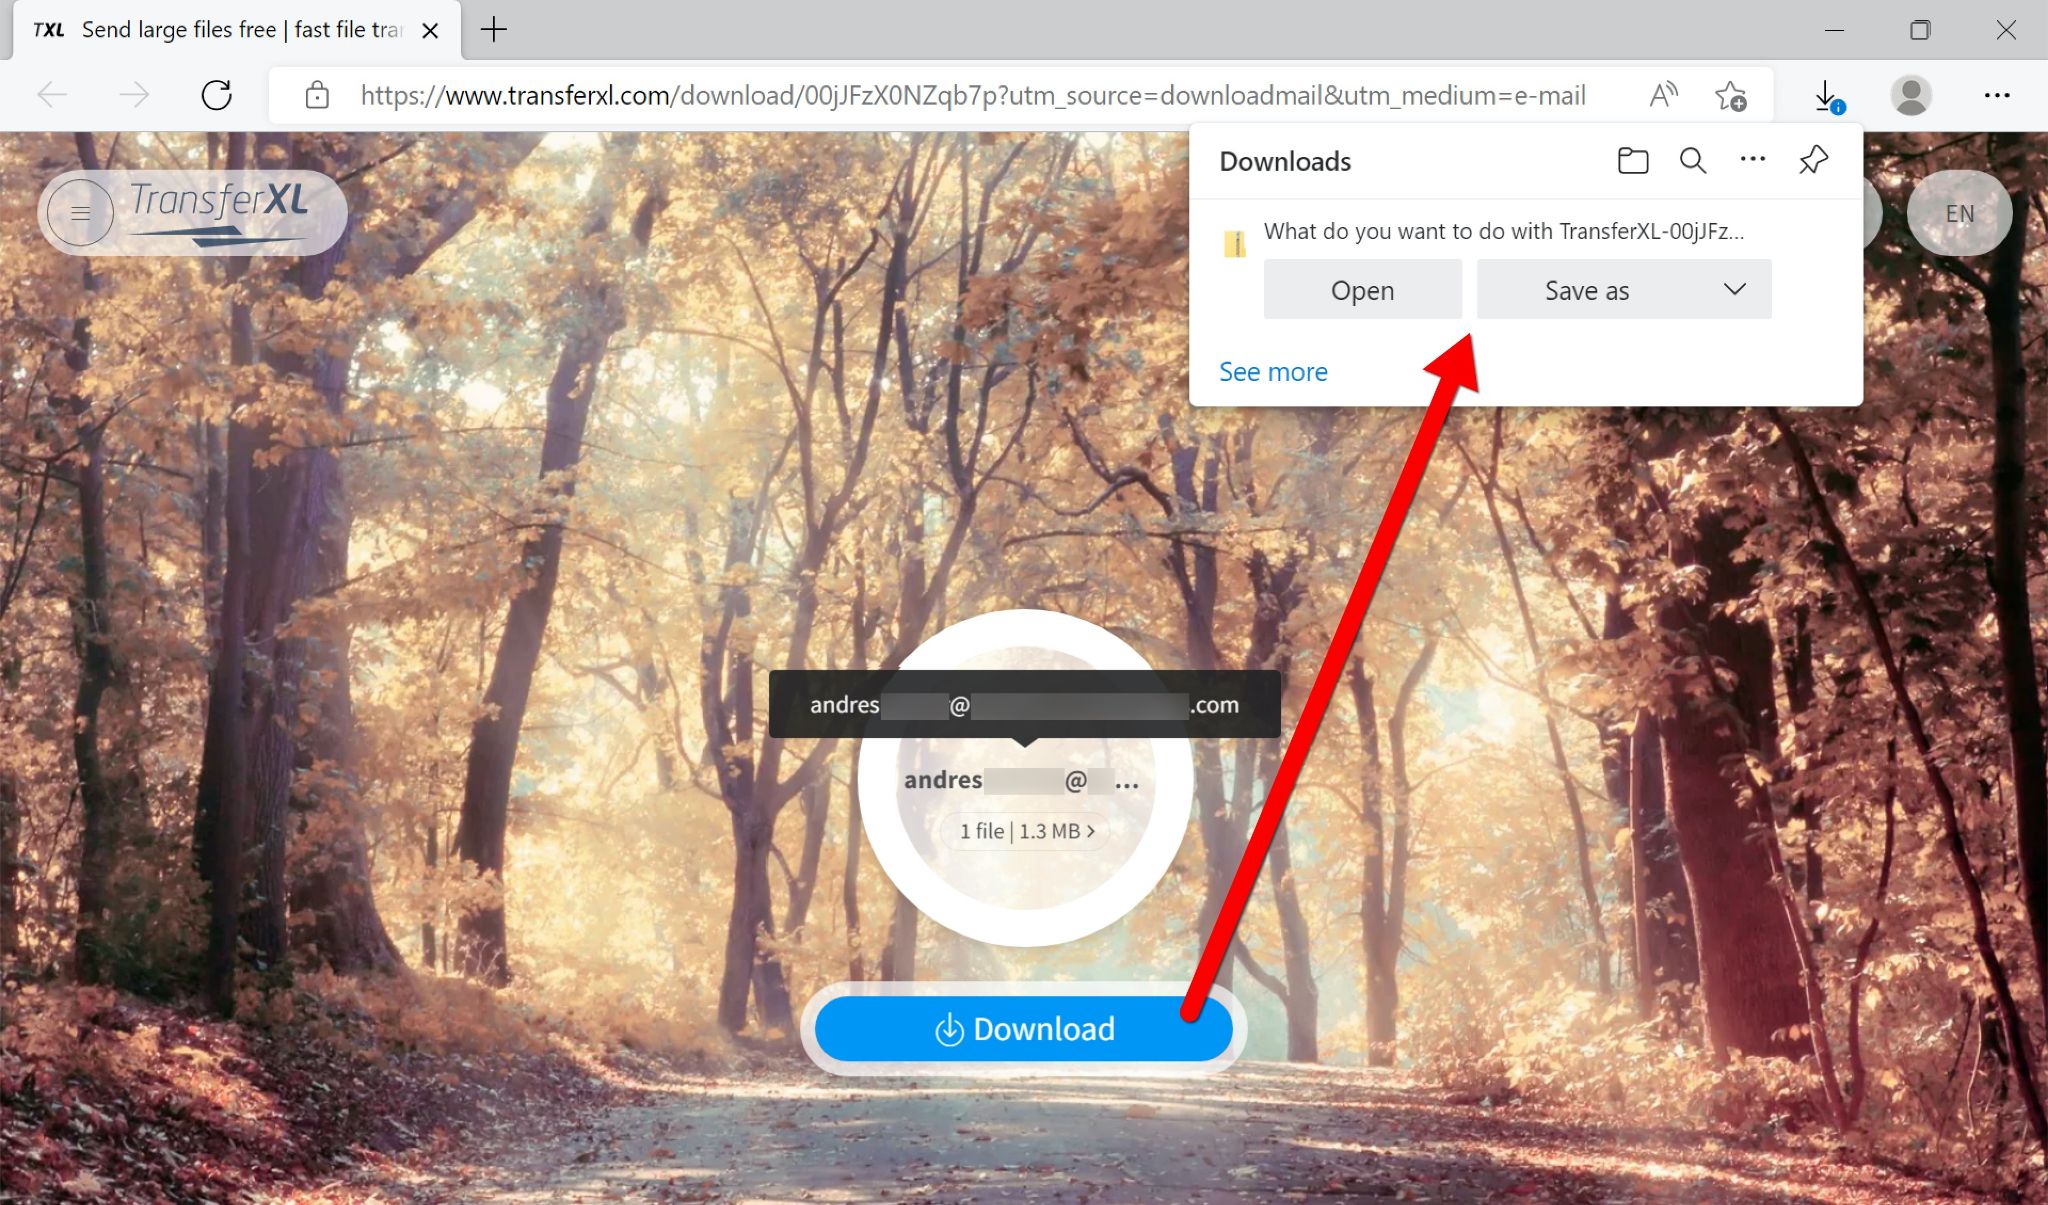 The screenshot shows the TransferXL URL from this case study opened in a web browser and downloading malware provided by Projector Libra. A red arrow points to the popup where the user is invited to open or save the malware. 